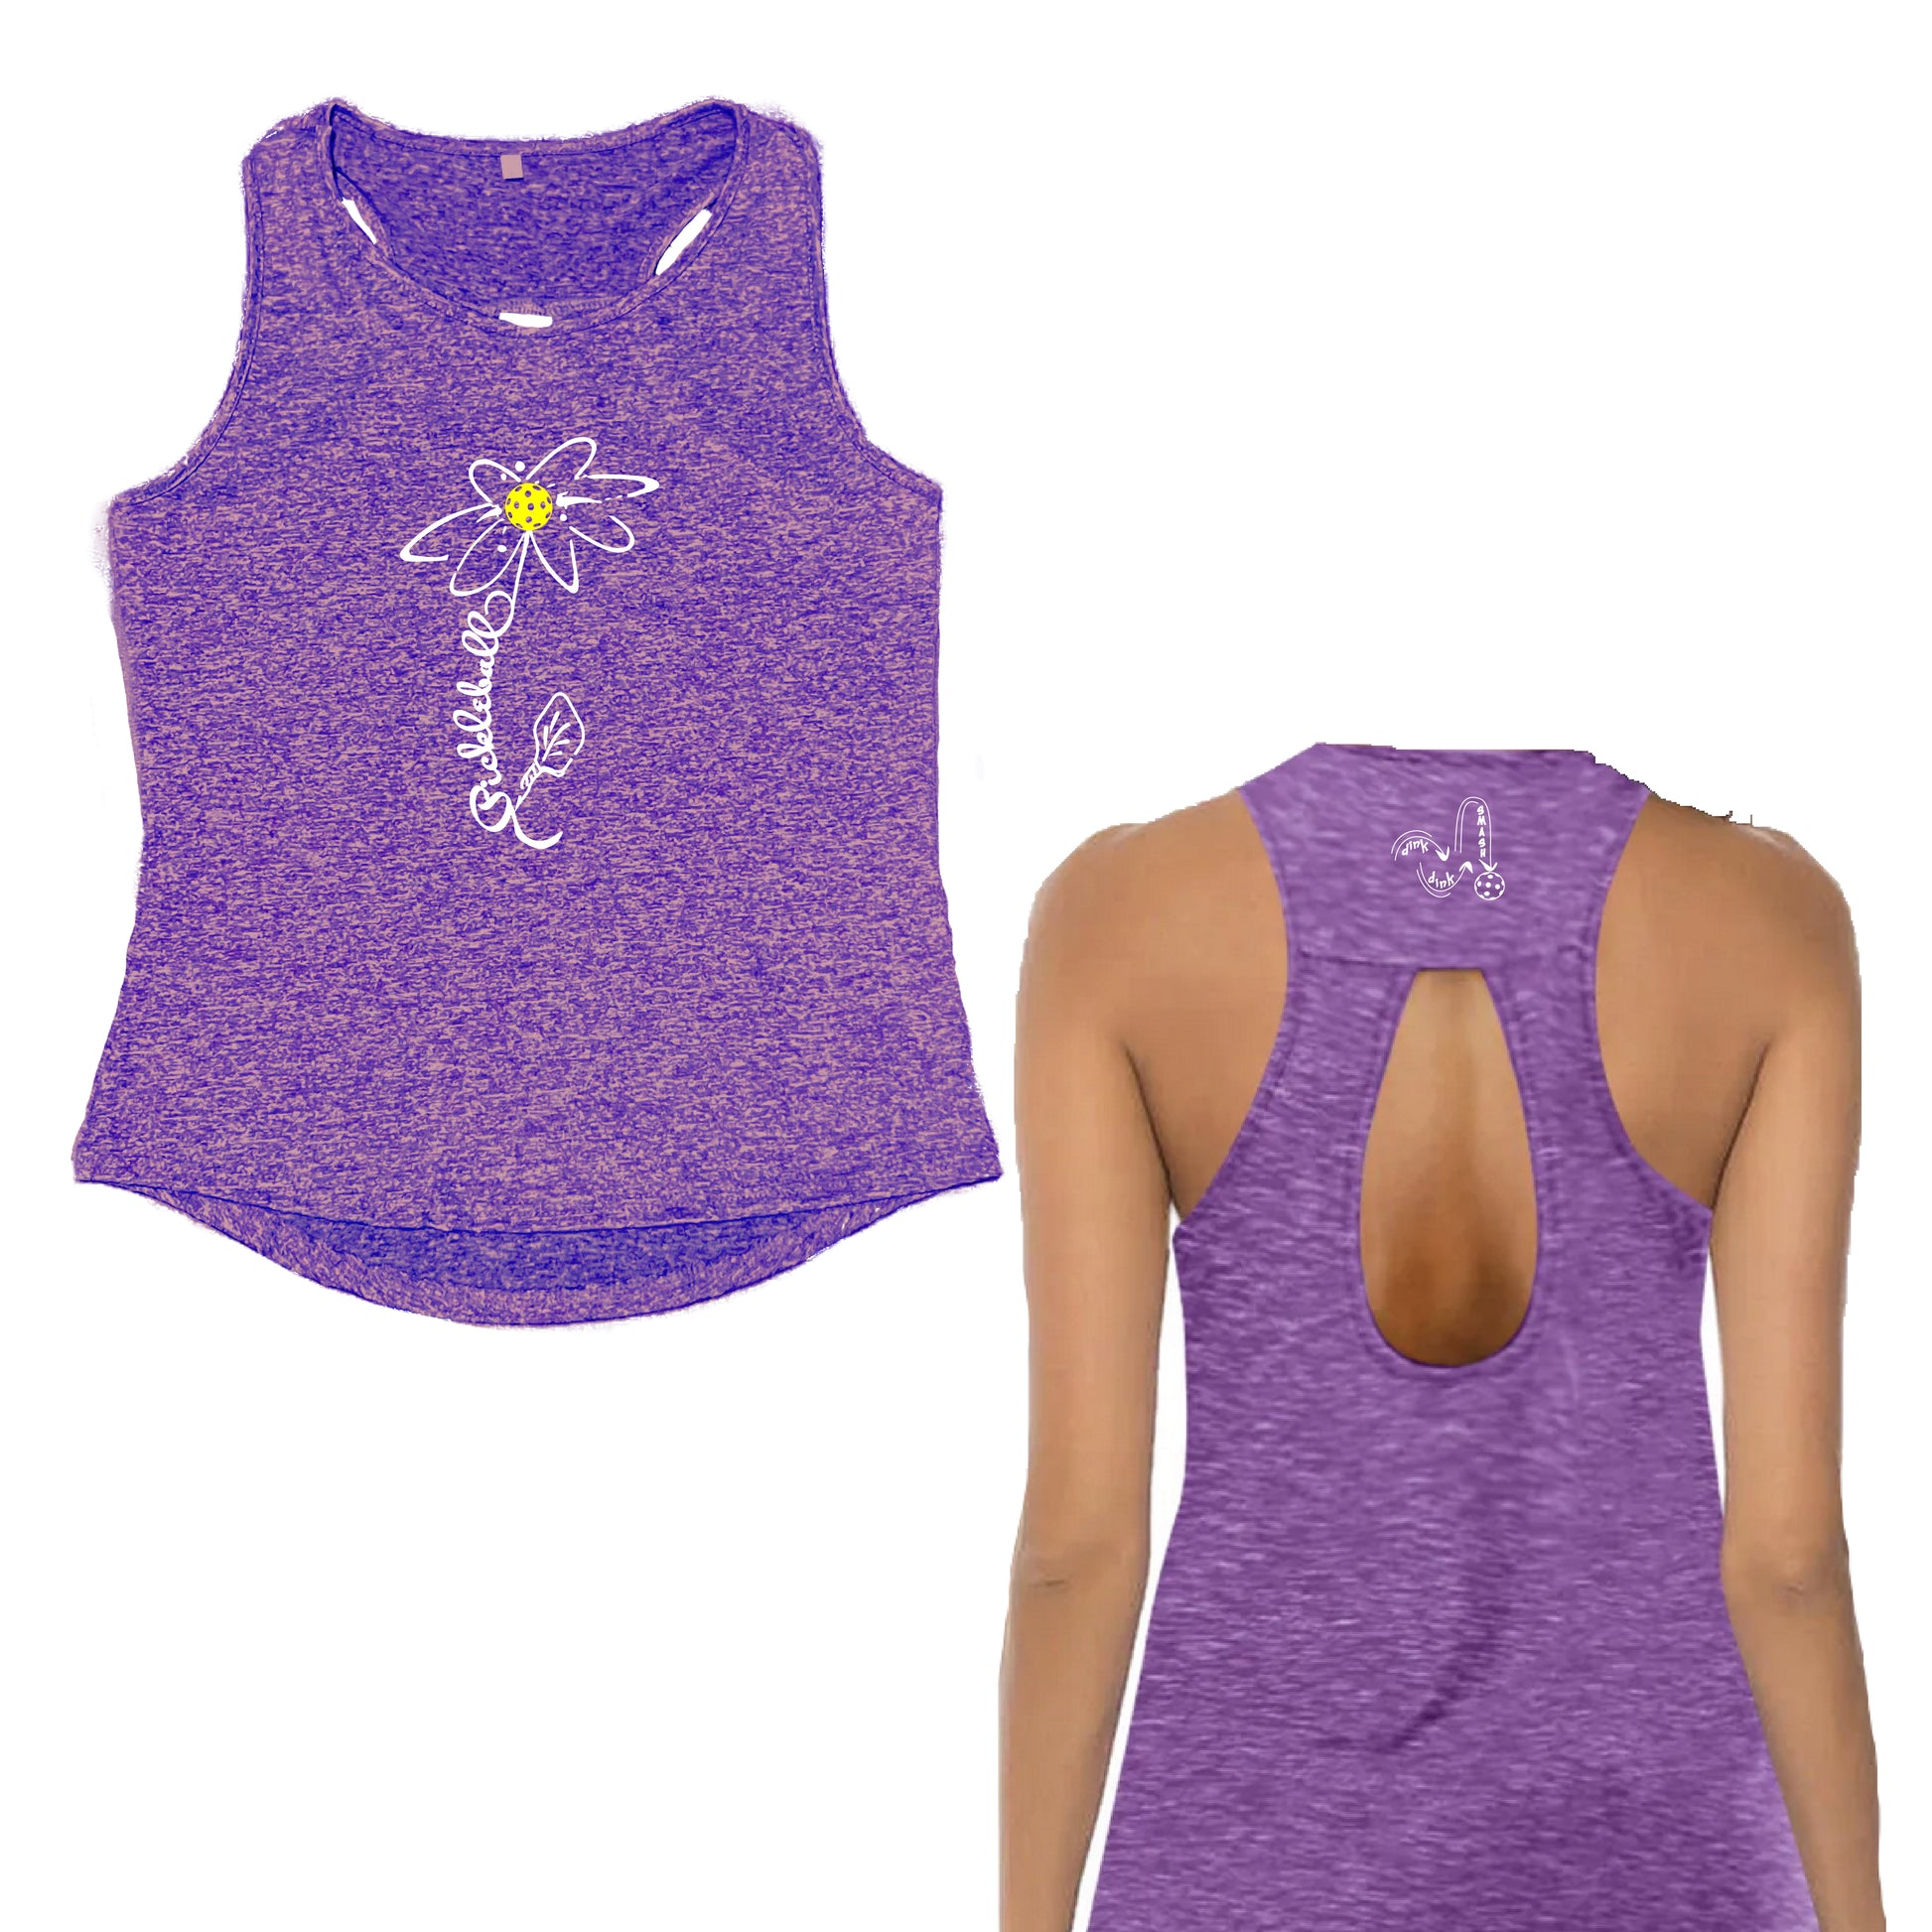 For women who want to look stylish while playing pickleball, this lightweight sleeveless tank with a teardrop back is perfect. The sheer fabric is perfect for layering over your favorite sports bra, fitted or cropped tank for a stylish and trendy look.  The tank is made of 100% polyester moisture-wicking fabric that draws moisture away from the body, ensuring that you stay dry and comfortable throughout the game.